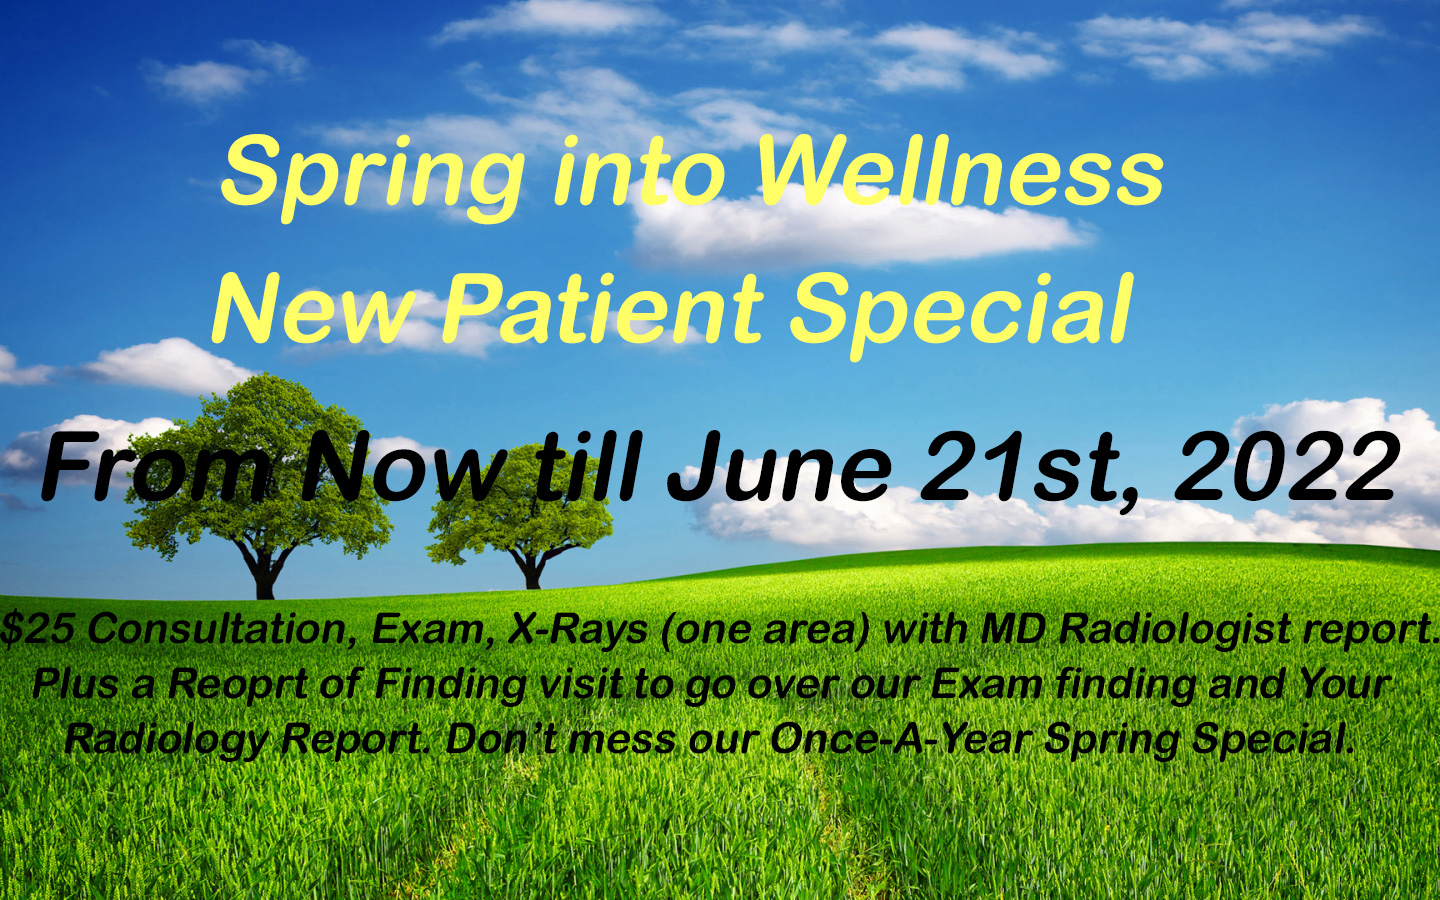 Spring into Wellness New Patient Special